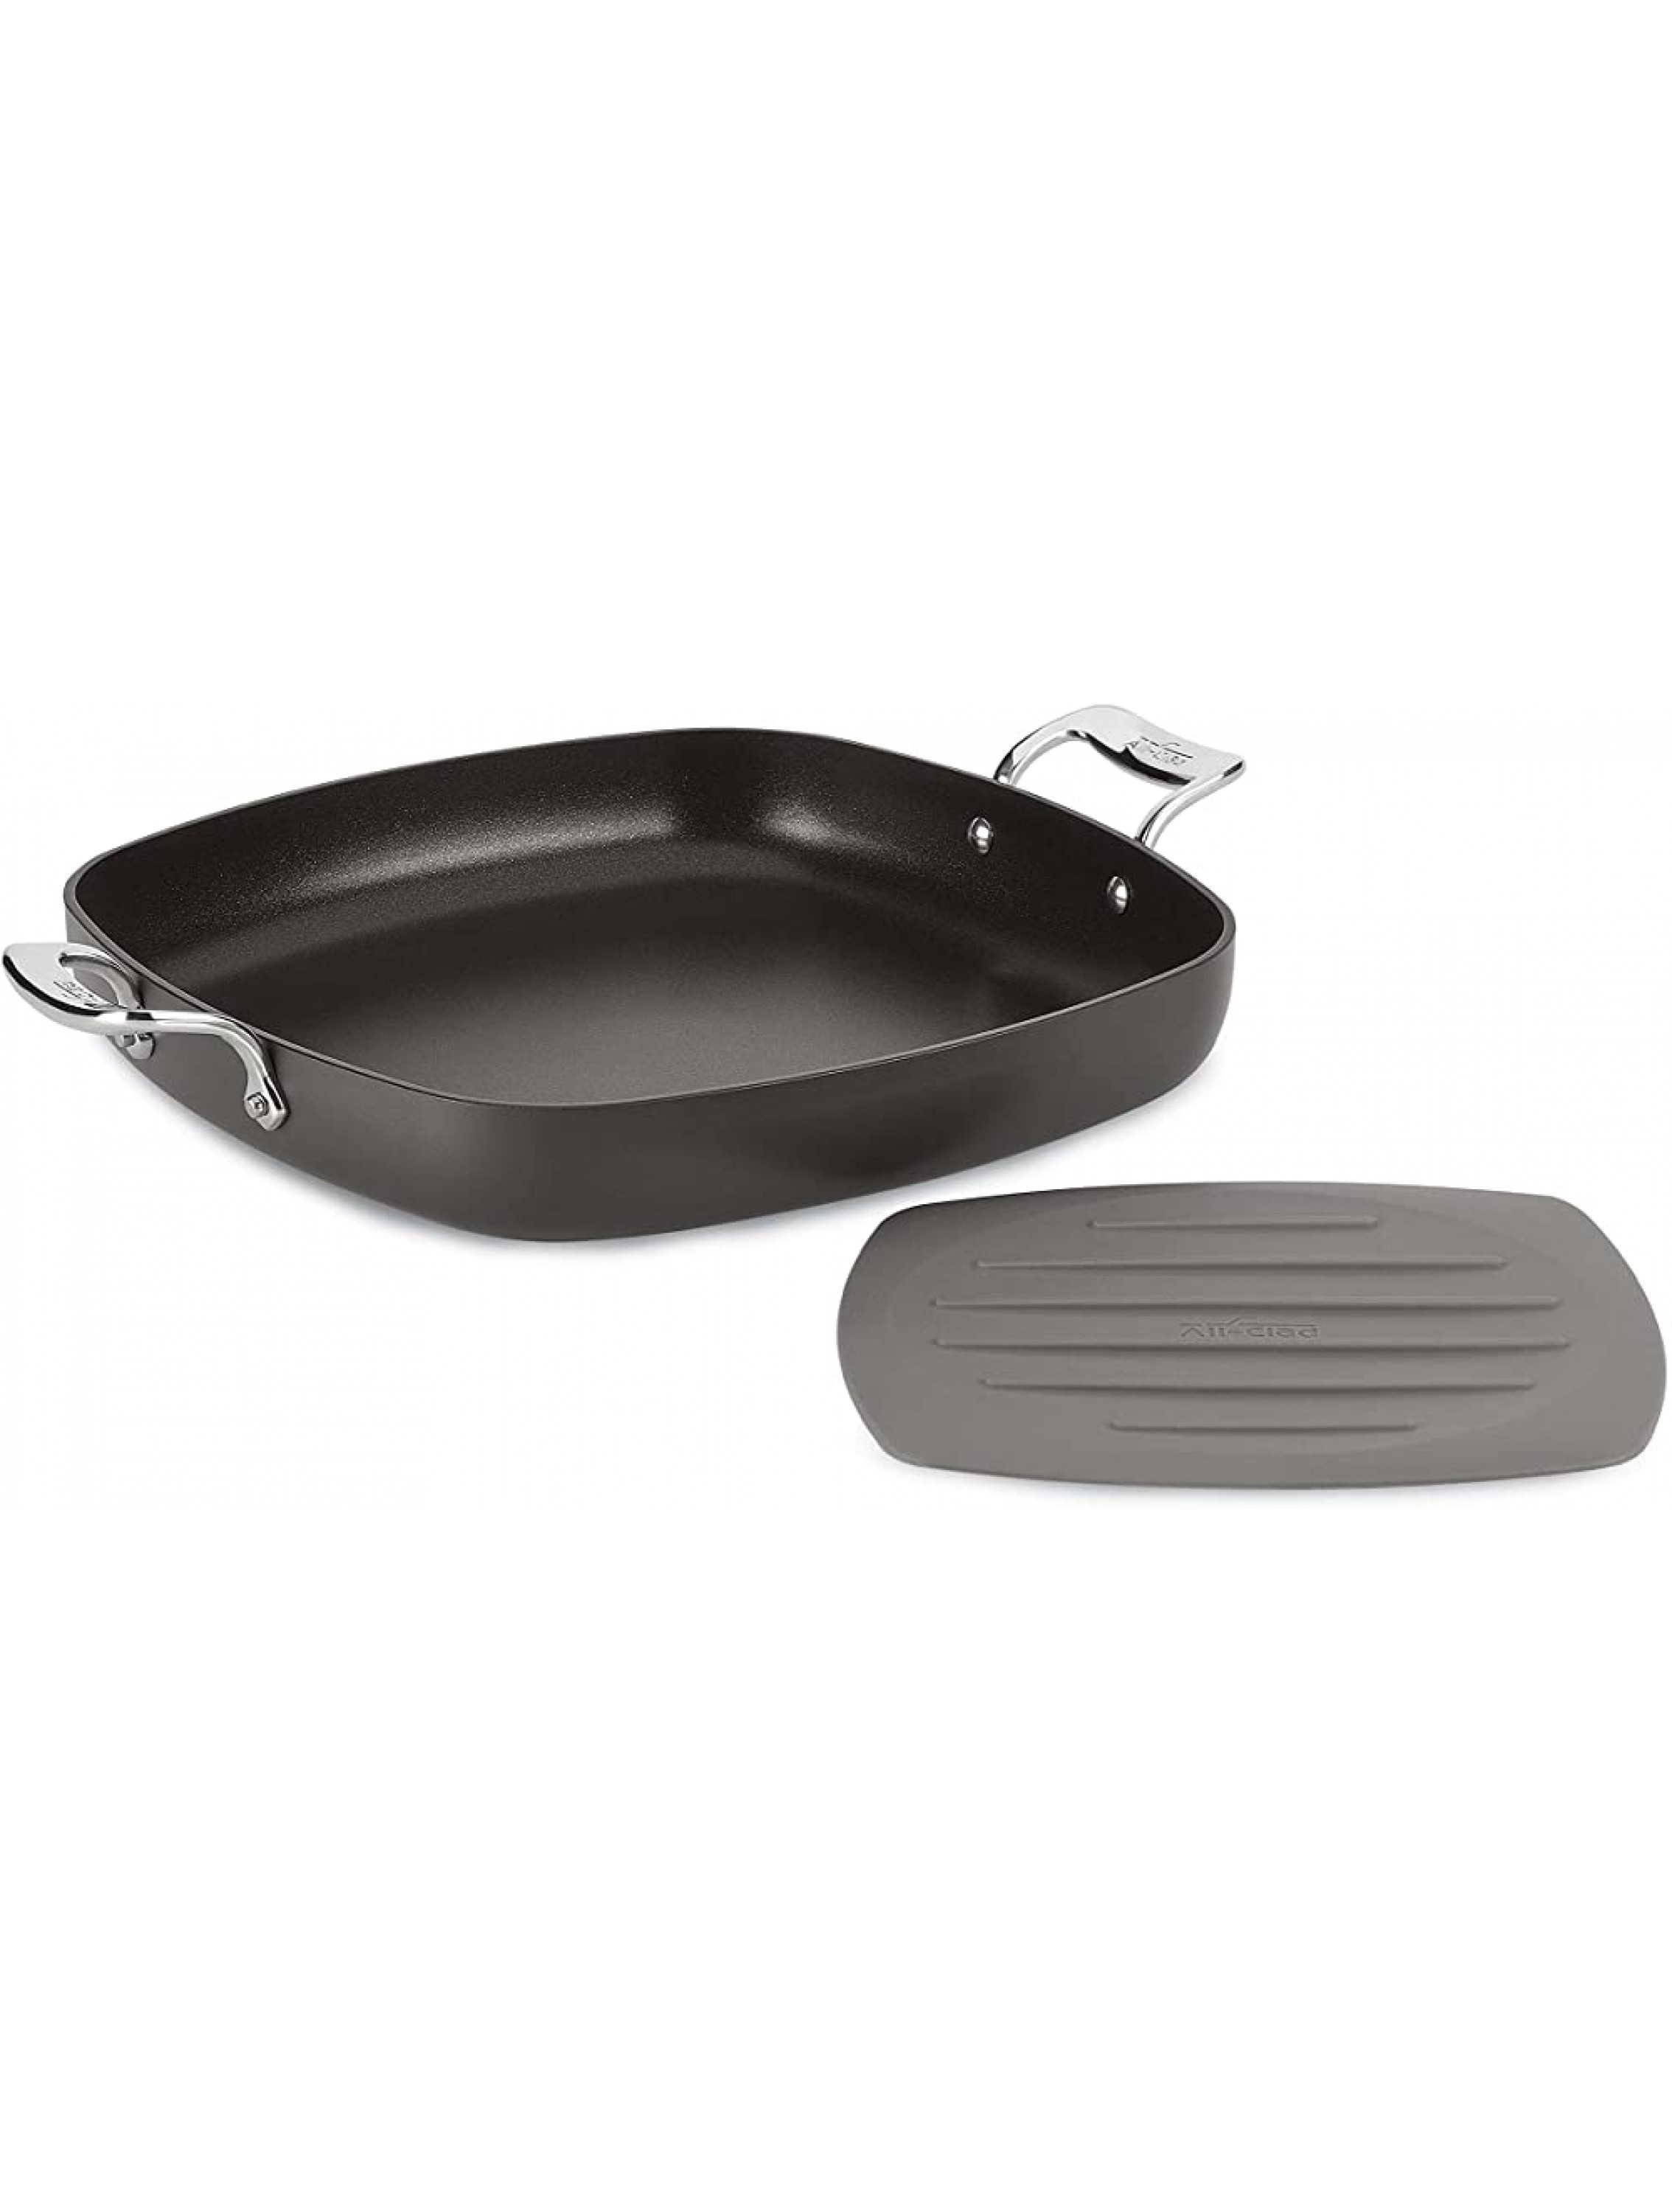 All-Clad Essentials Nonstick Hard Anodized Square Pan with Trivet 13 inch Black - BIW2NRD6I